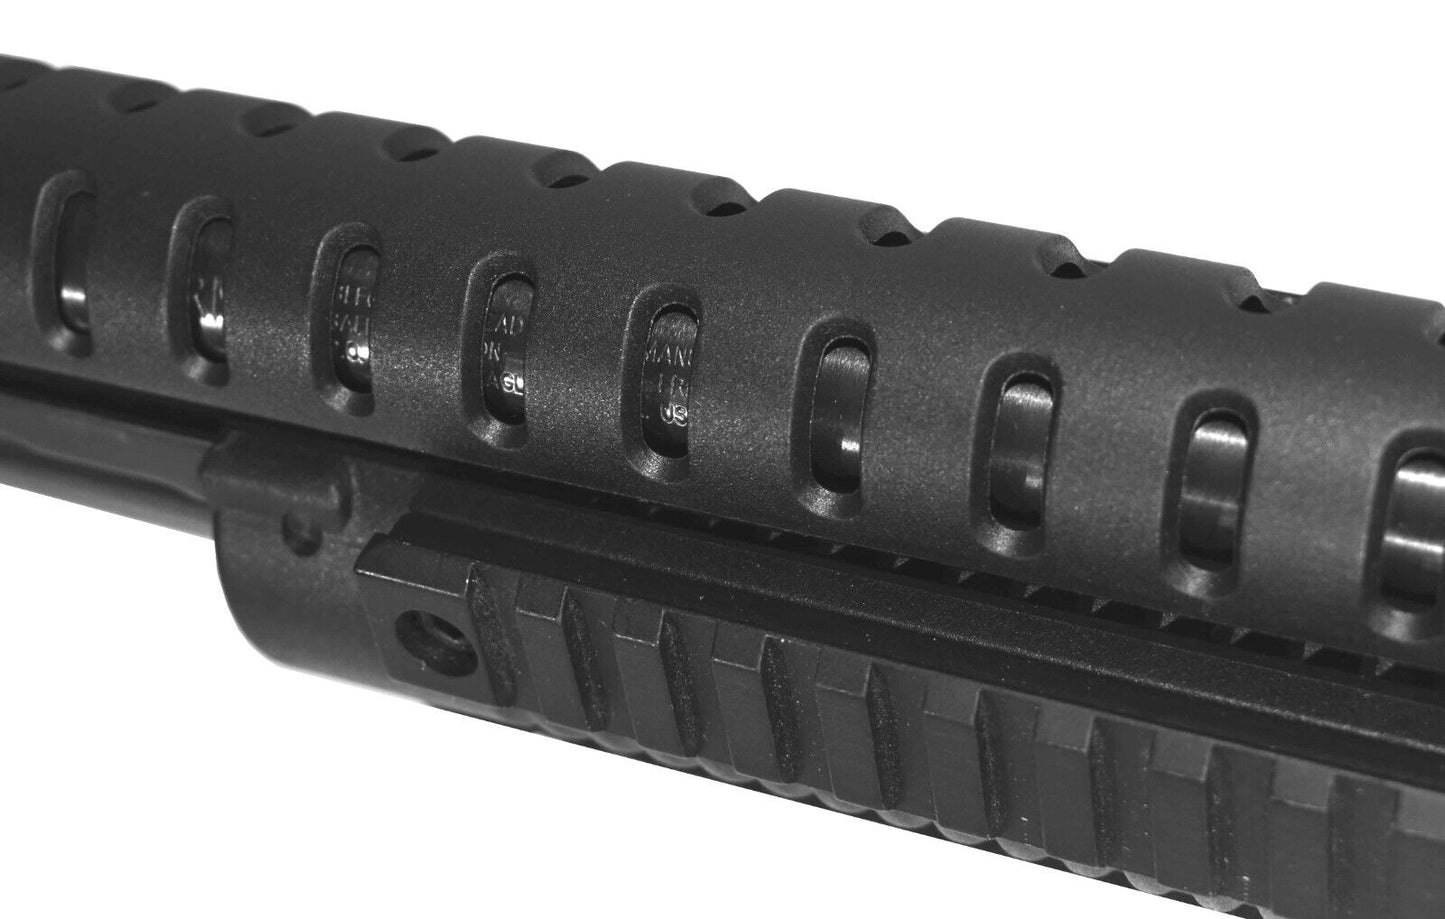 Polymer Heat Shield For Ithaca 12 gauge smooth barrels tactical hunting home defense. - TRINITY SUPPLY INC